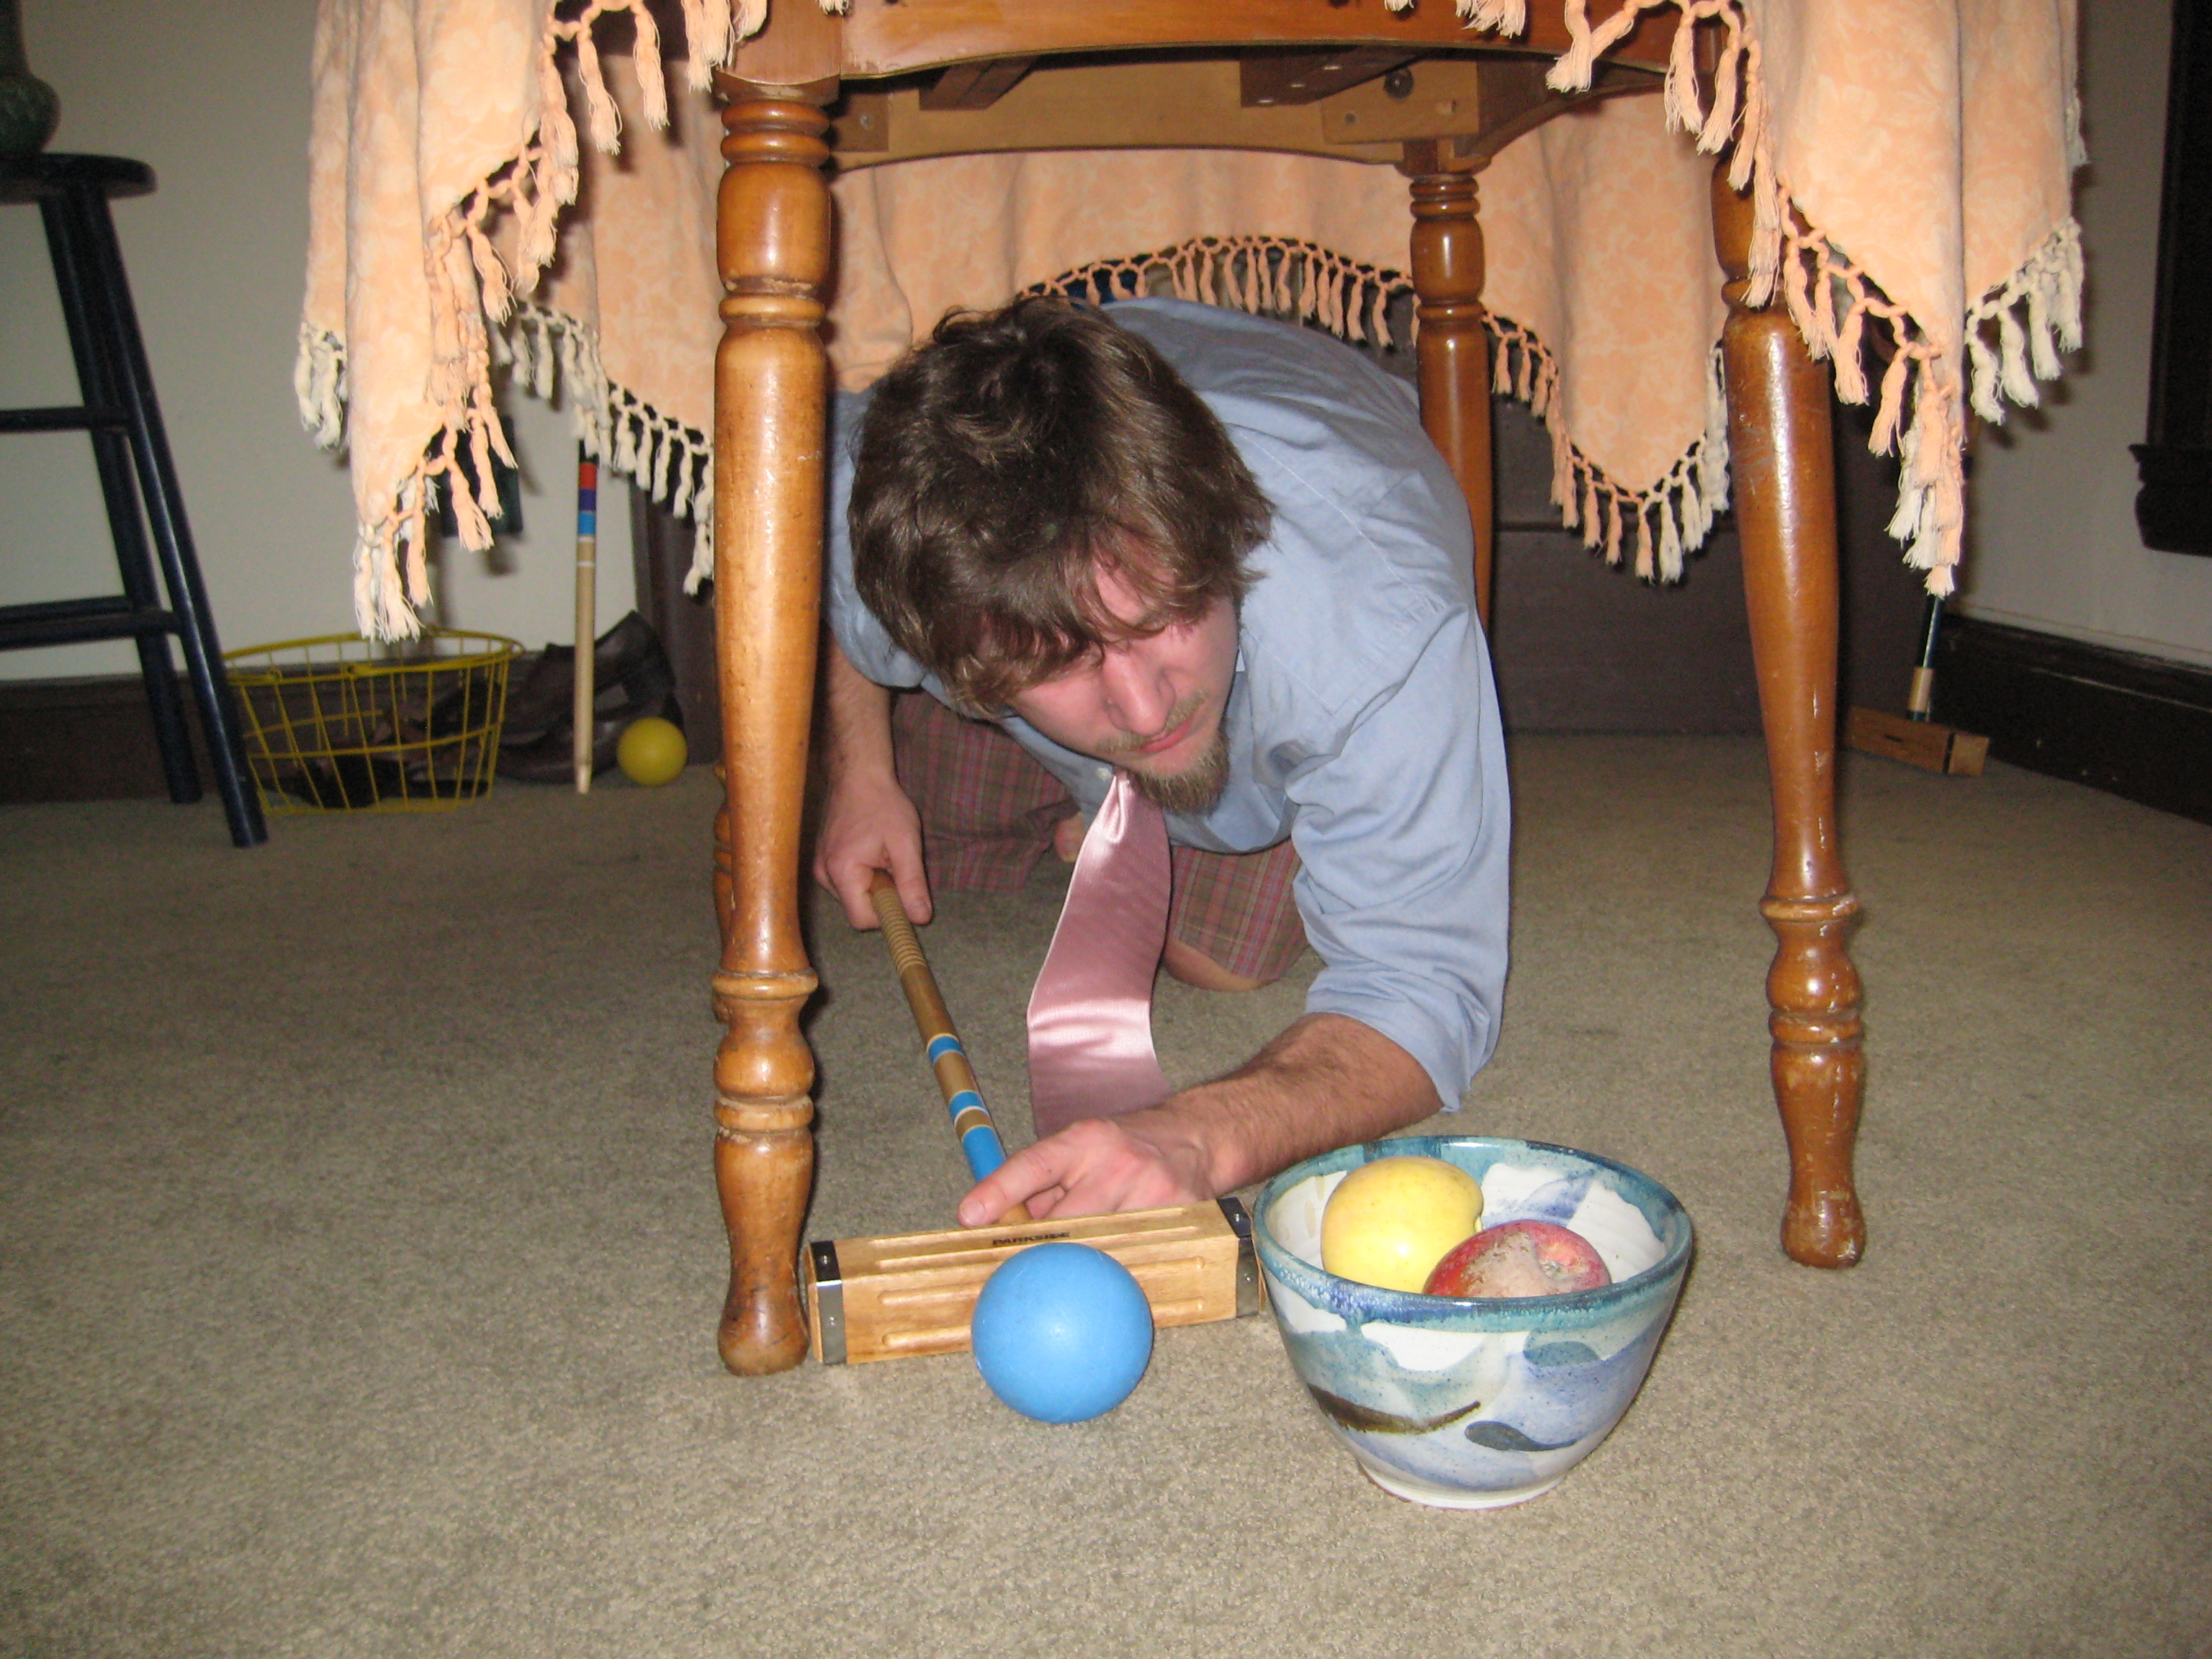 Unconventional techniques may be required to navigate around obstacles, such as bowls of fruit.